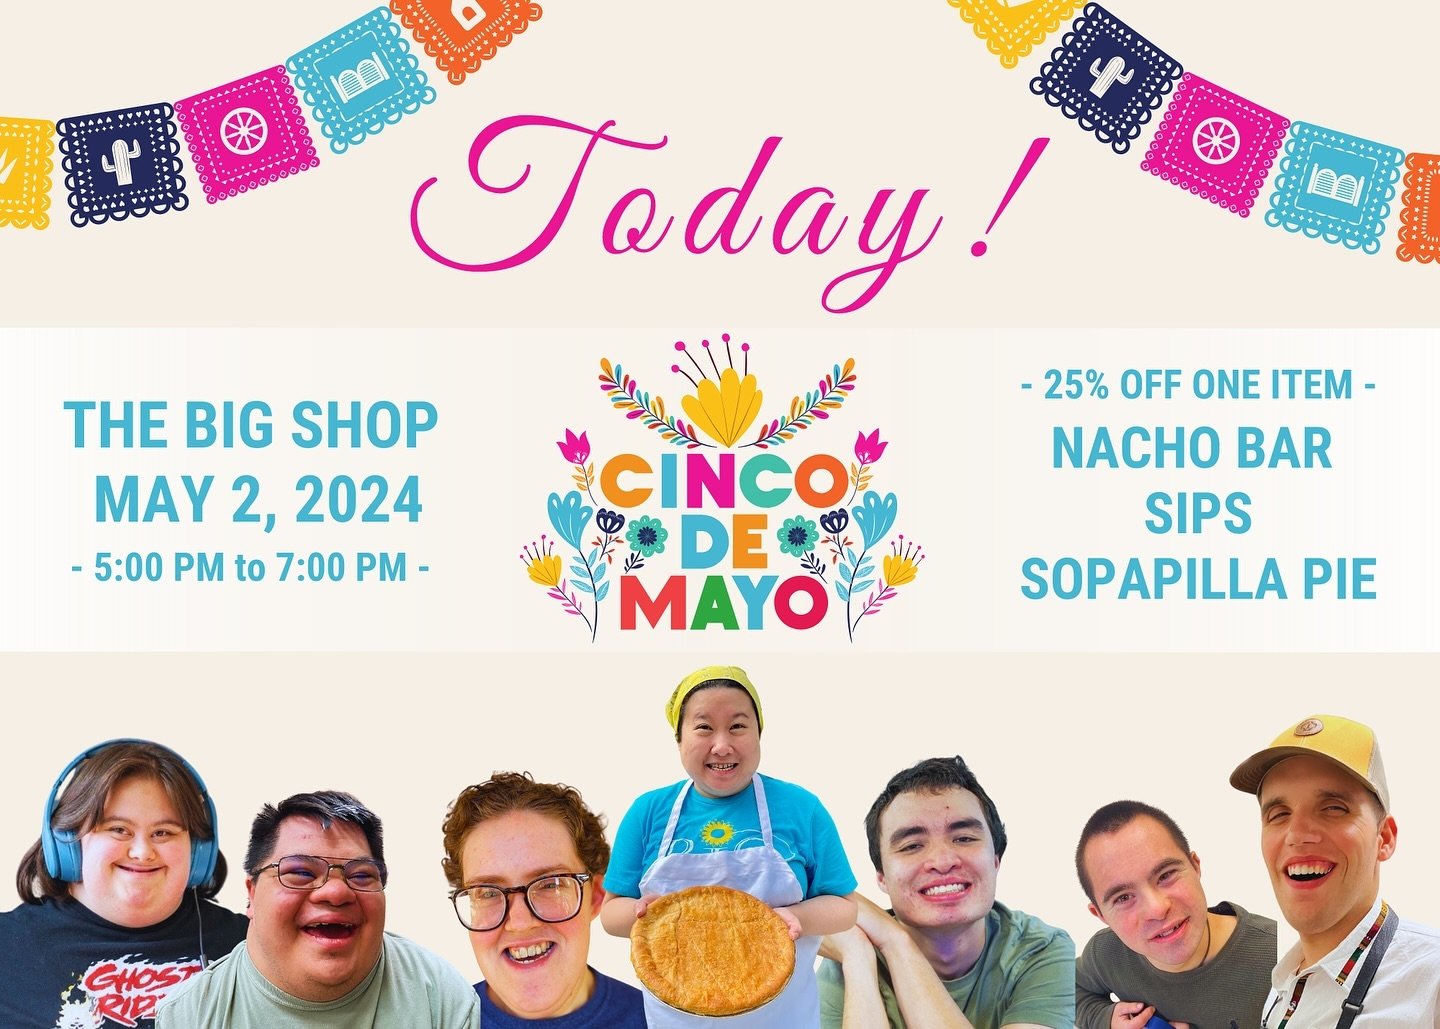 TONIGHT&rsquo;s the night to celebrate Cinco De Mayo in style! 
&nbsp;
Bring your friends tonight from 5 PM to 7 PM for a festive after-hours fiesta at The BiG Shop. Enjoy our nacho bar, sip on refreshing drinks, and treat yourself to samples of our 